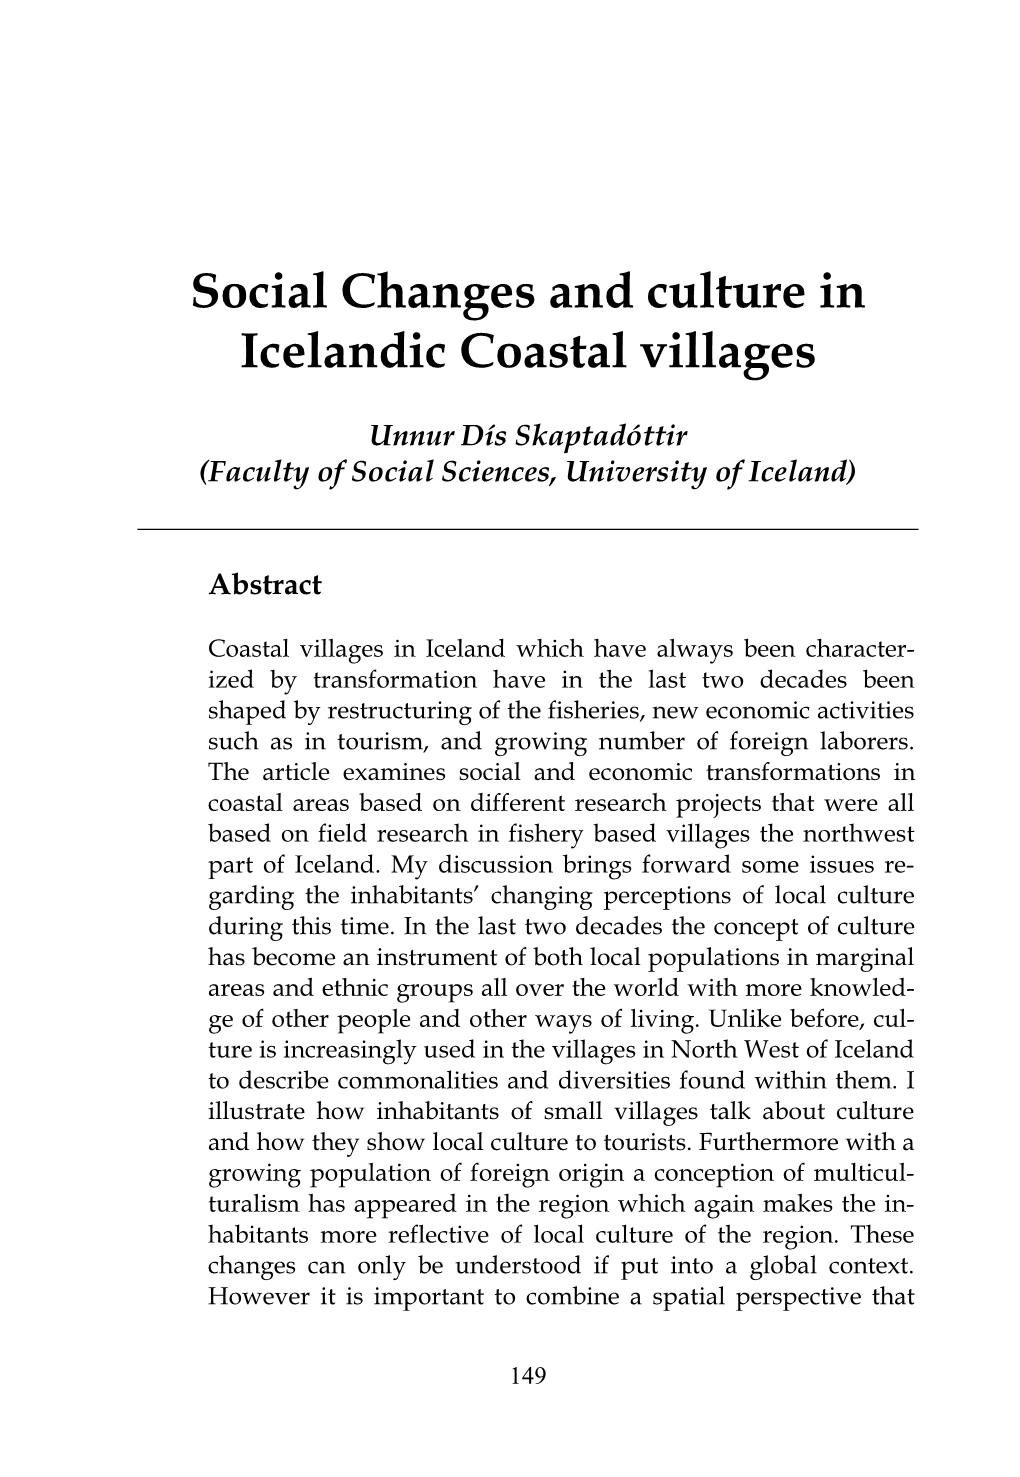 Social Changes and Culture in Icelandic Coastal Villages